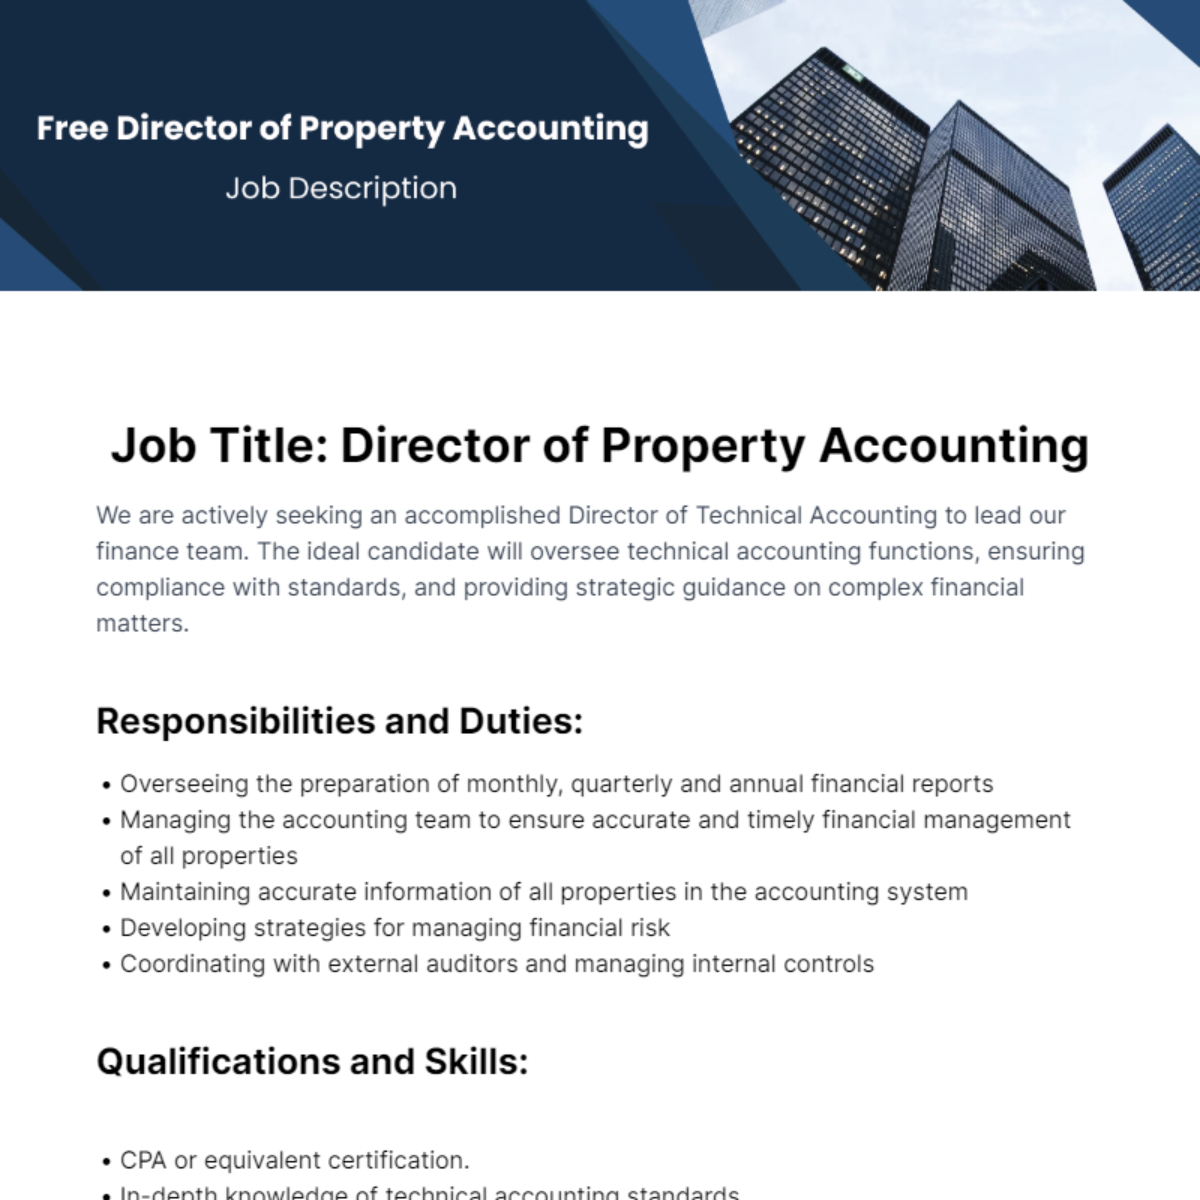 Director of Property Accounting Job Description Template